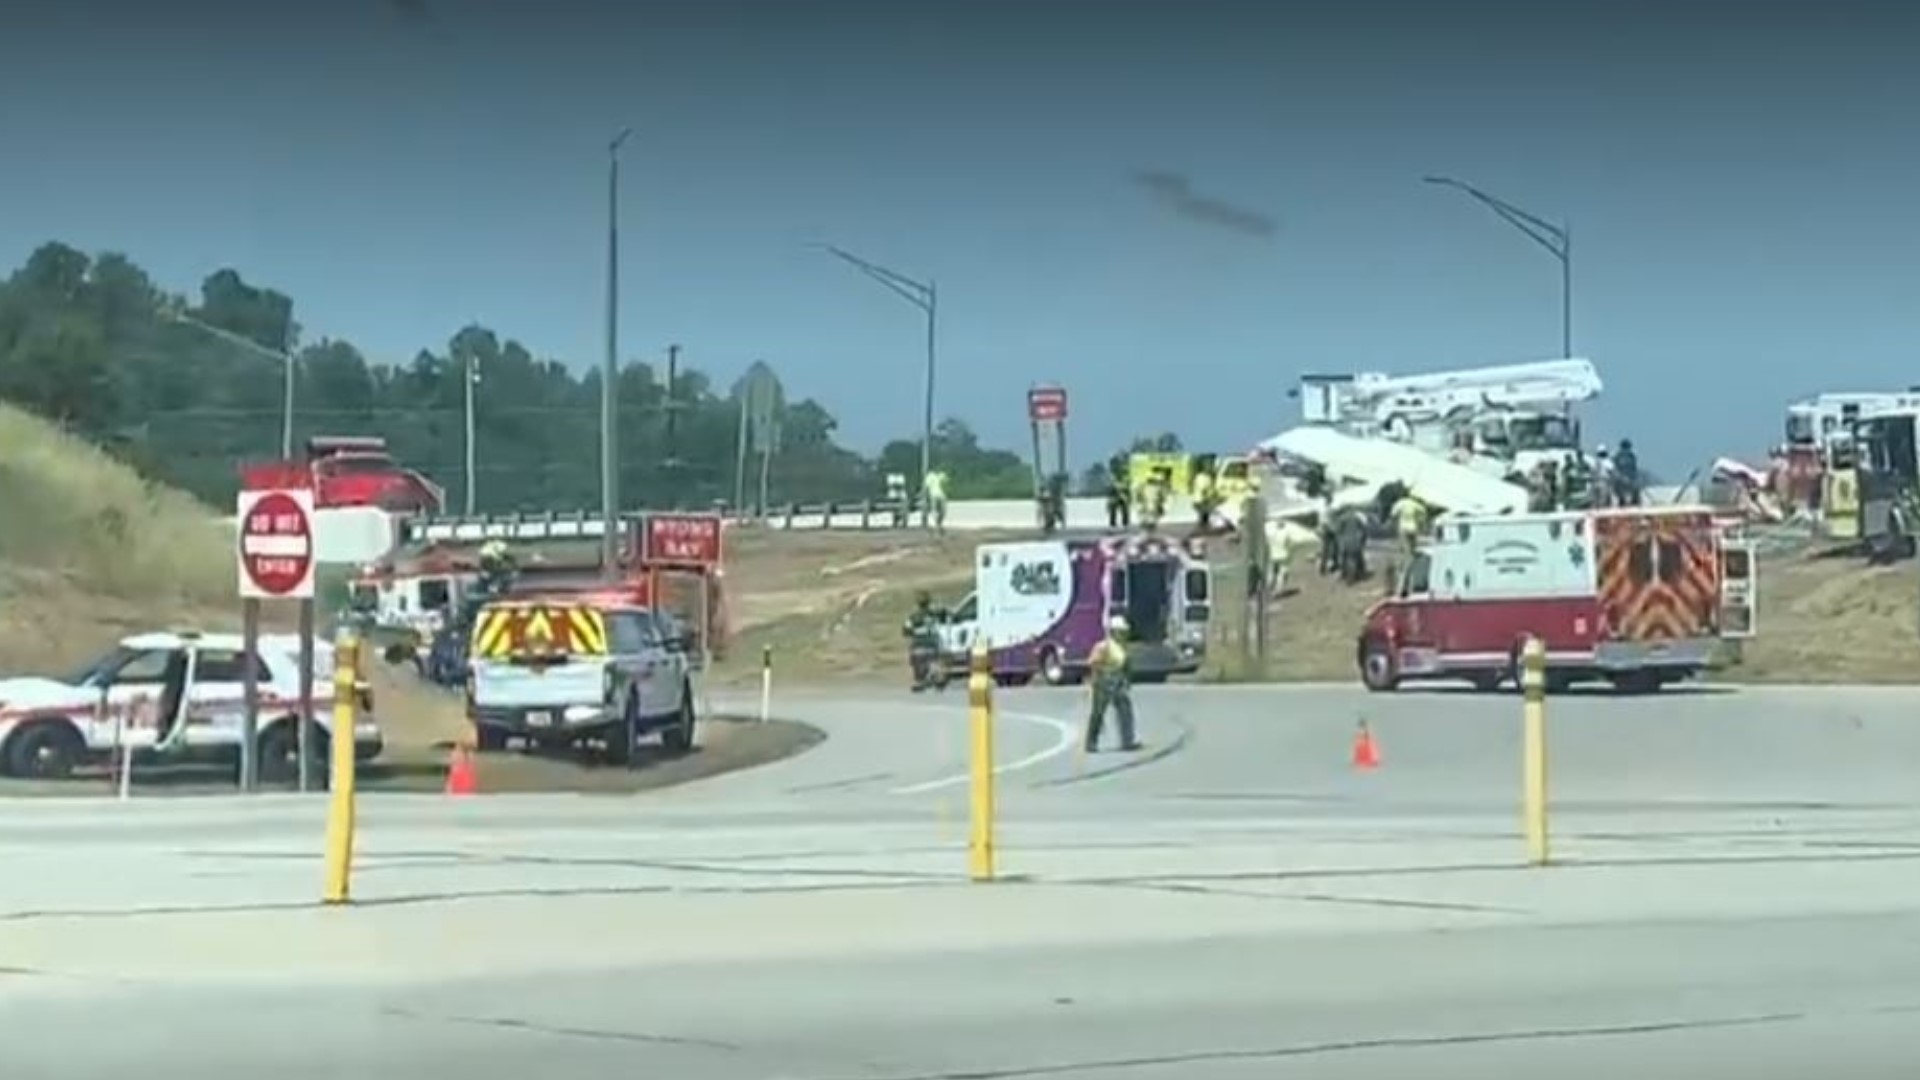 The crash reportedly happened at 2:30 p.m. All exit ramps onto the interchange are closed, according to PA Turnpike Alerts. The FAA is responding.